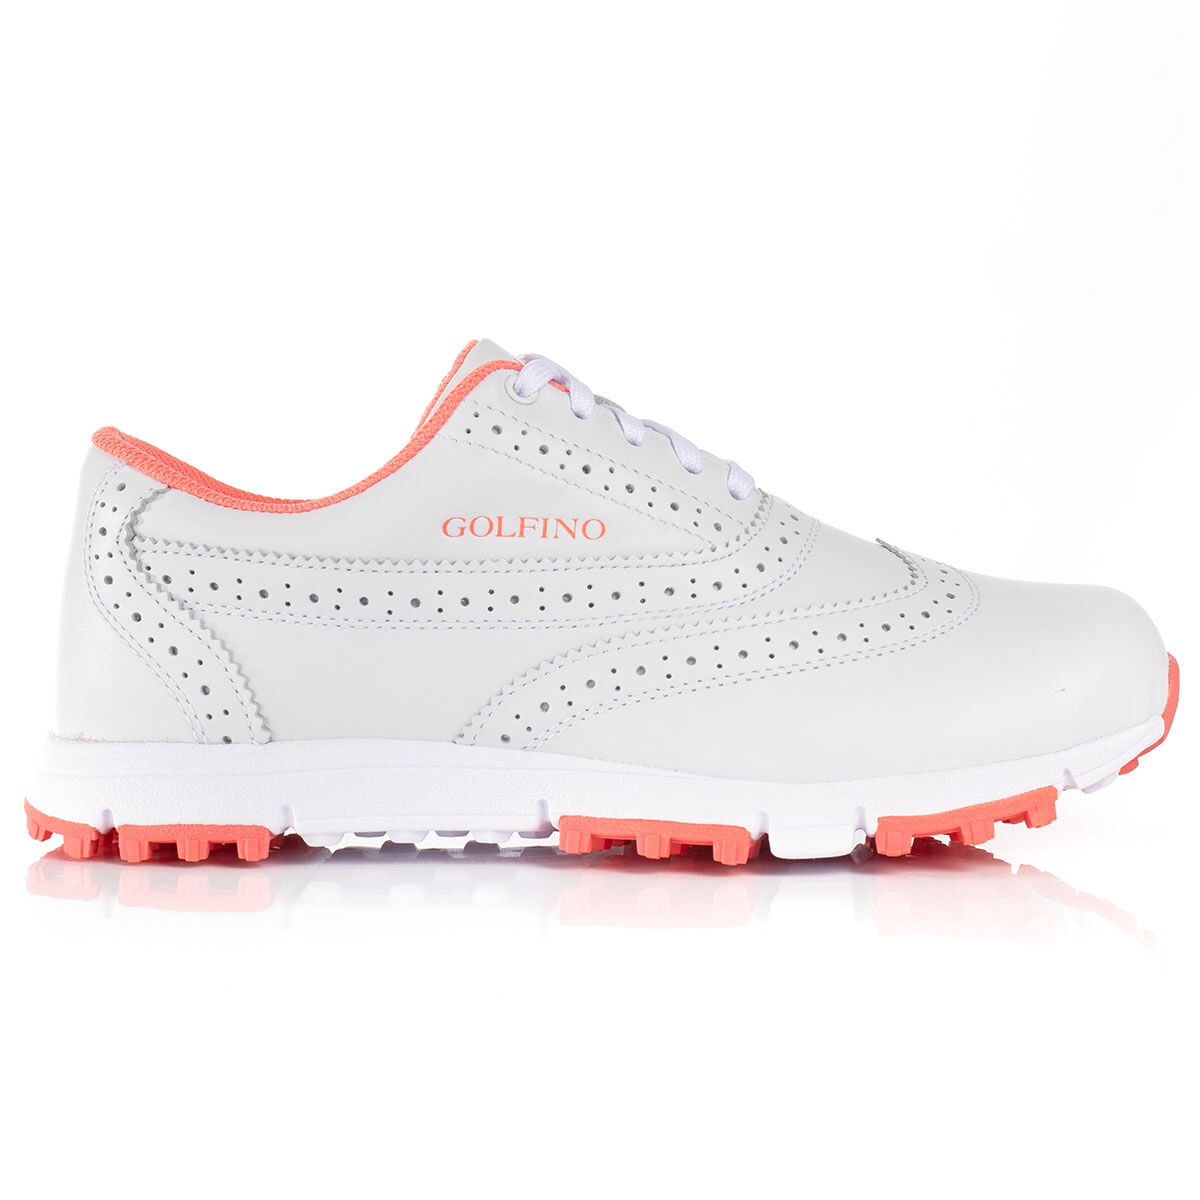 Golfino Womens White and Pink Aurora Spikeless Golf Shoes, Size: 5 | American Golf